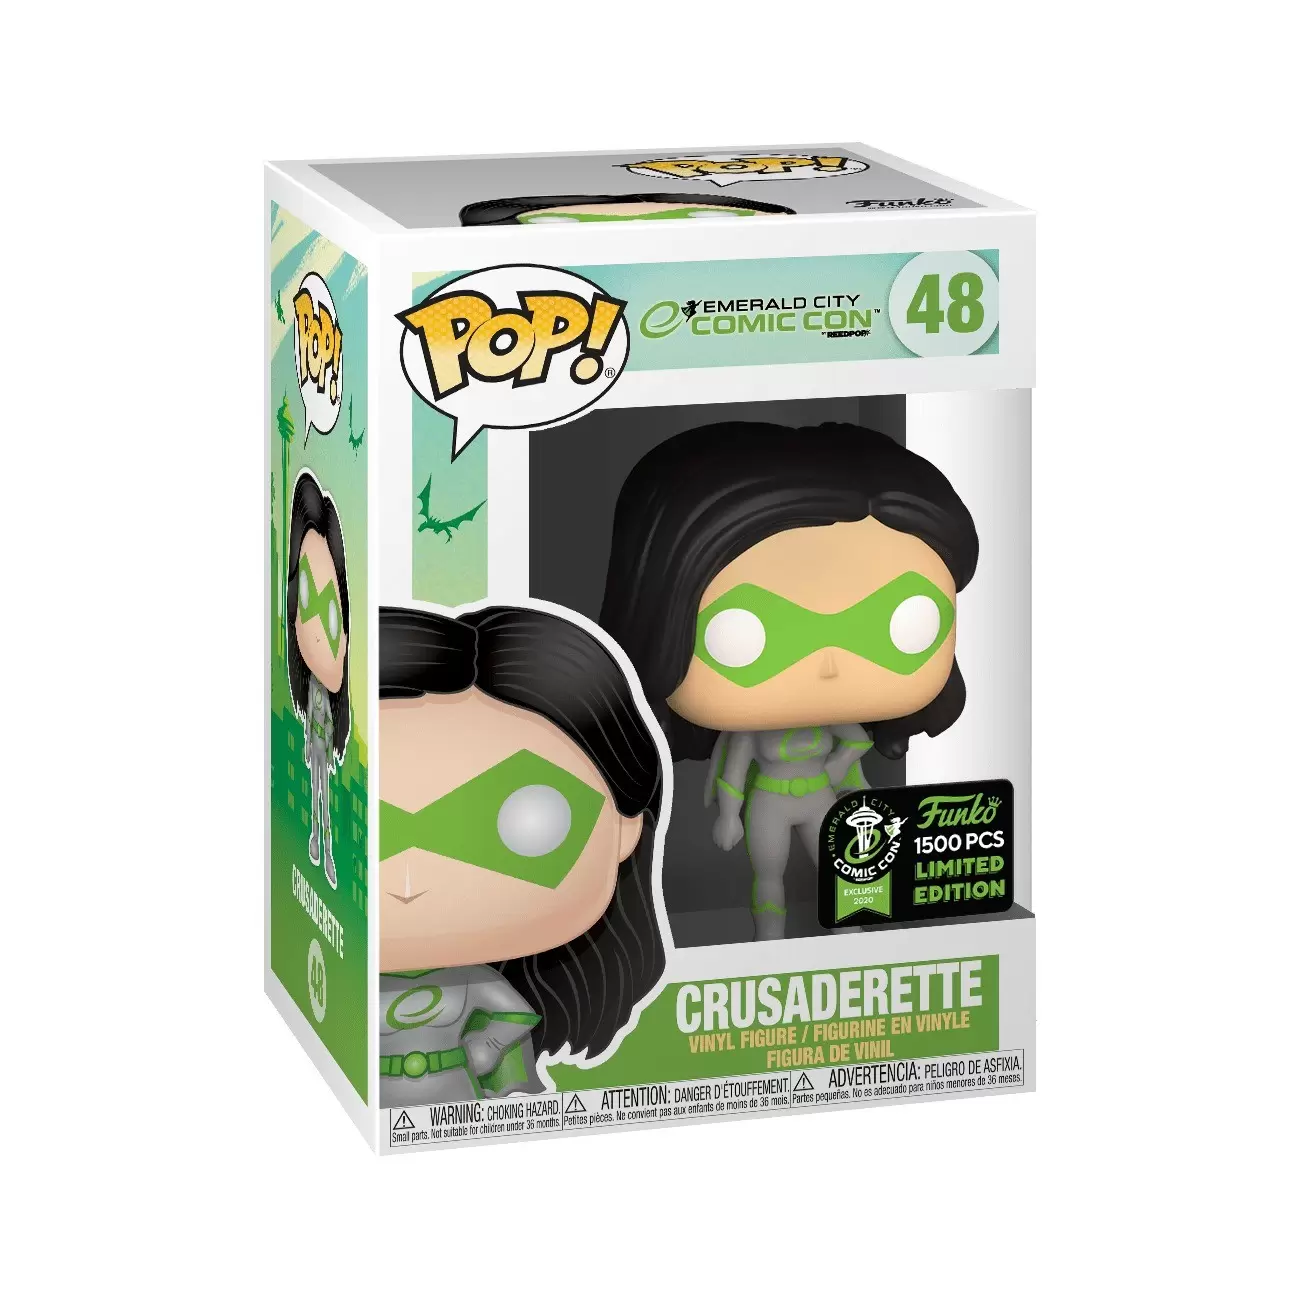 POP! Icons - Emeral City Comic Con - Crusaderette